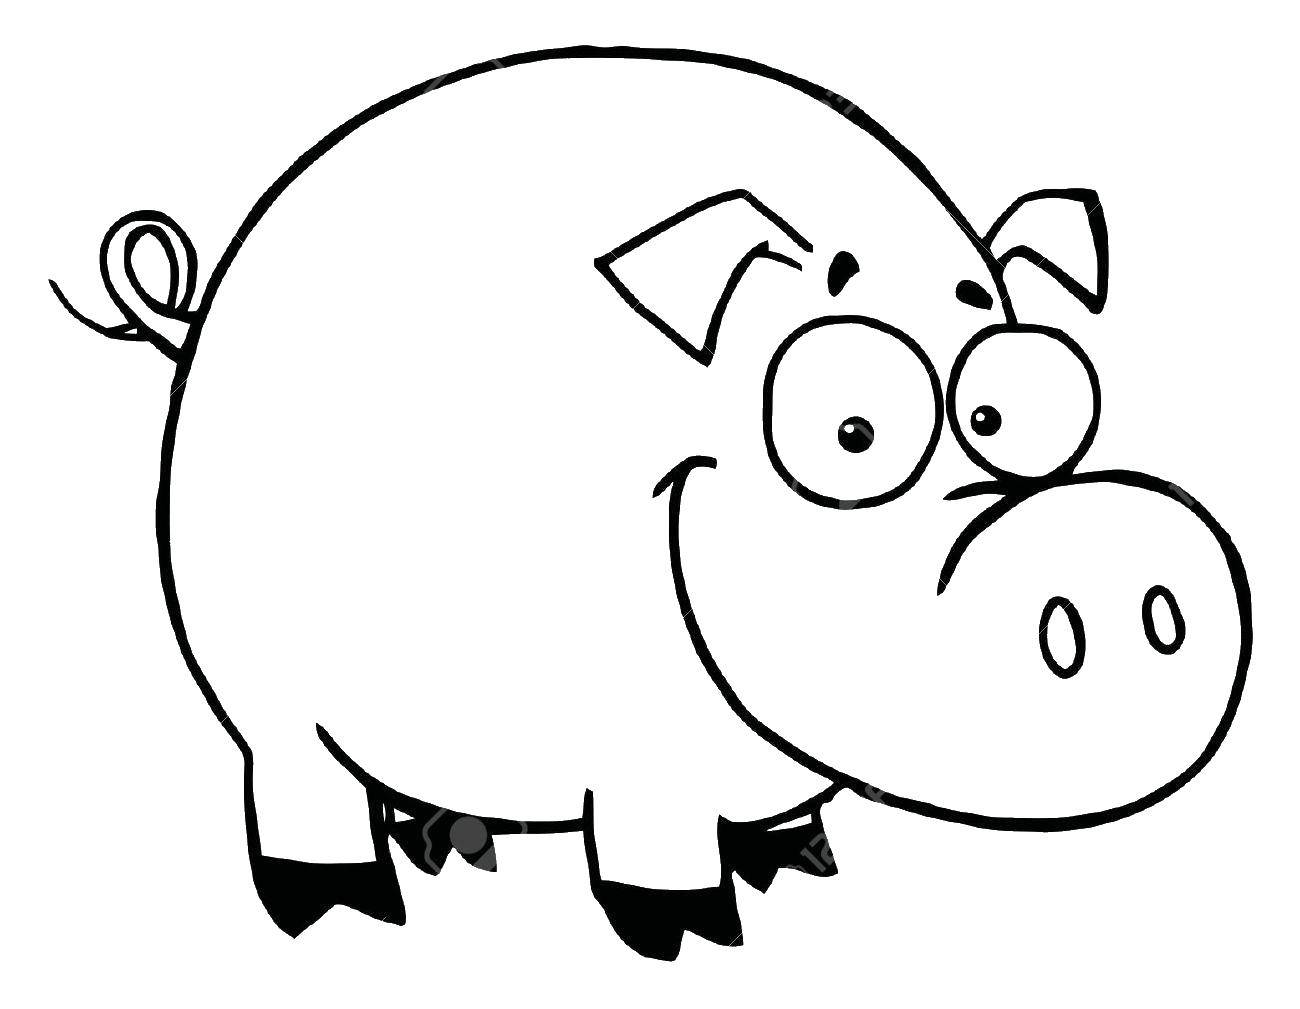 Coloring Piggy. Category Coloring pages for kids. Tags:  Animals, pig.